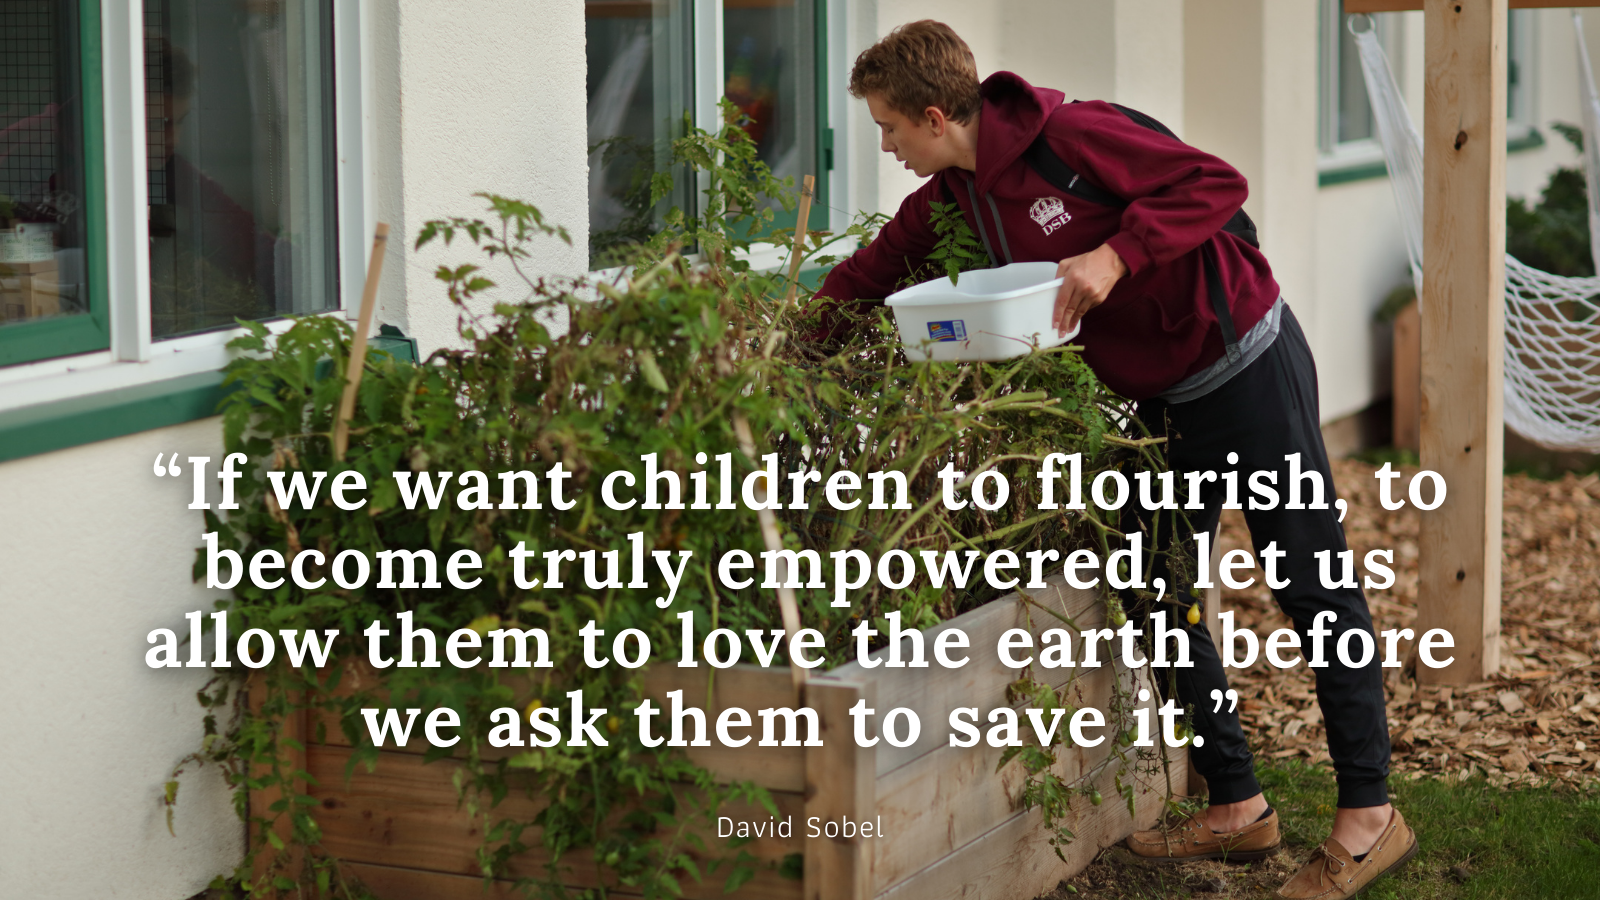 David Sobel quote: “if we want children to flourish, to become truly empowered, let us allow them to love the earth before we ask them to save it.”